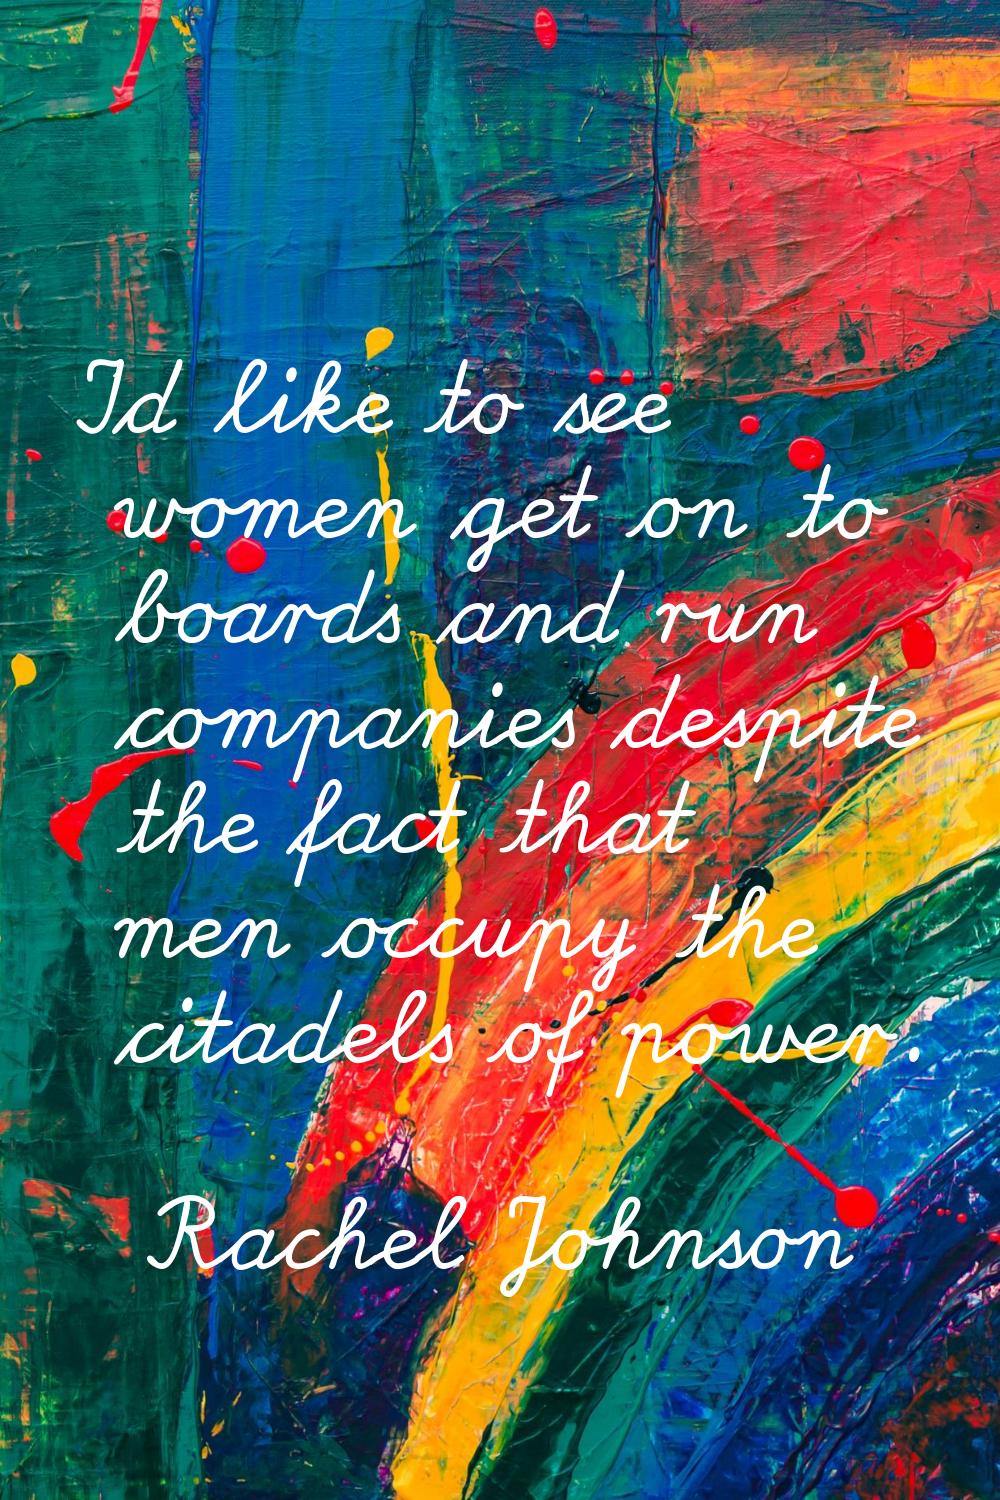 I'd like to see women get on to boards and run companies despite the fact that men occupy the citad